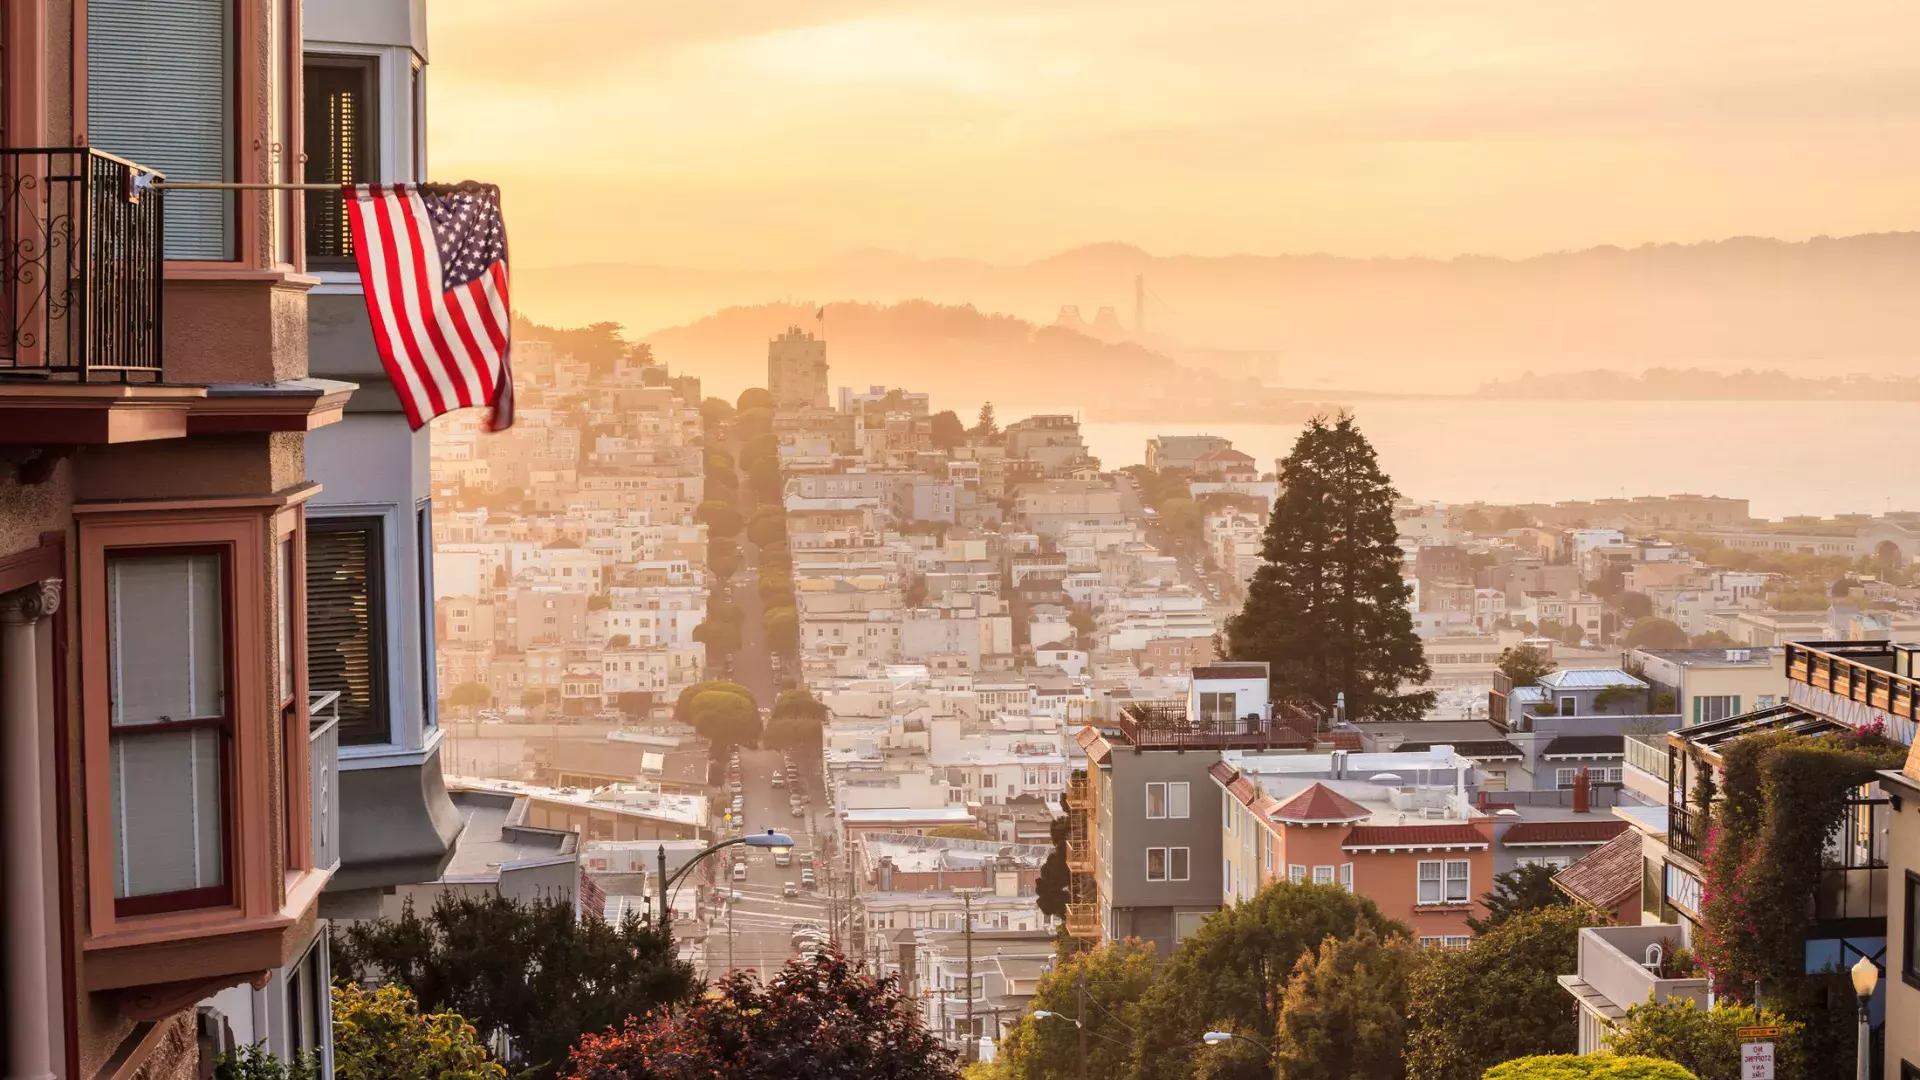 A view of San Francisco from the top of a hill, with an American flag waving in the foreground.